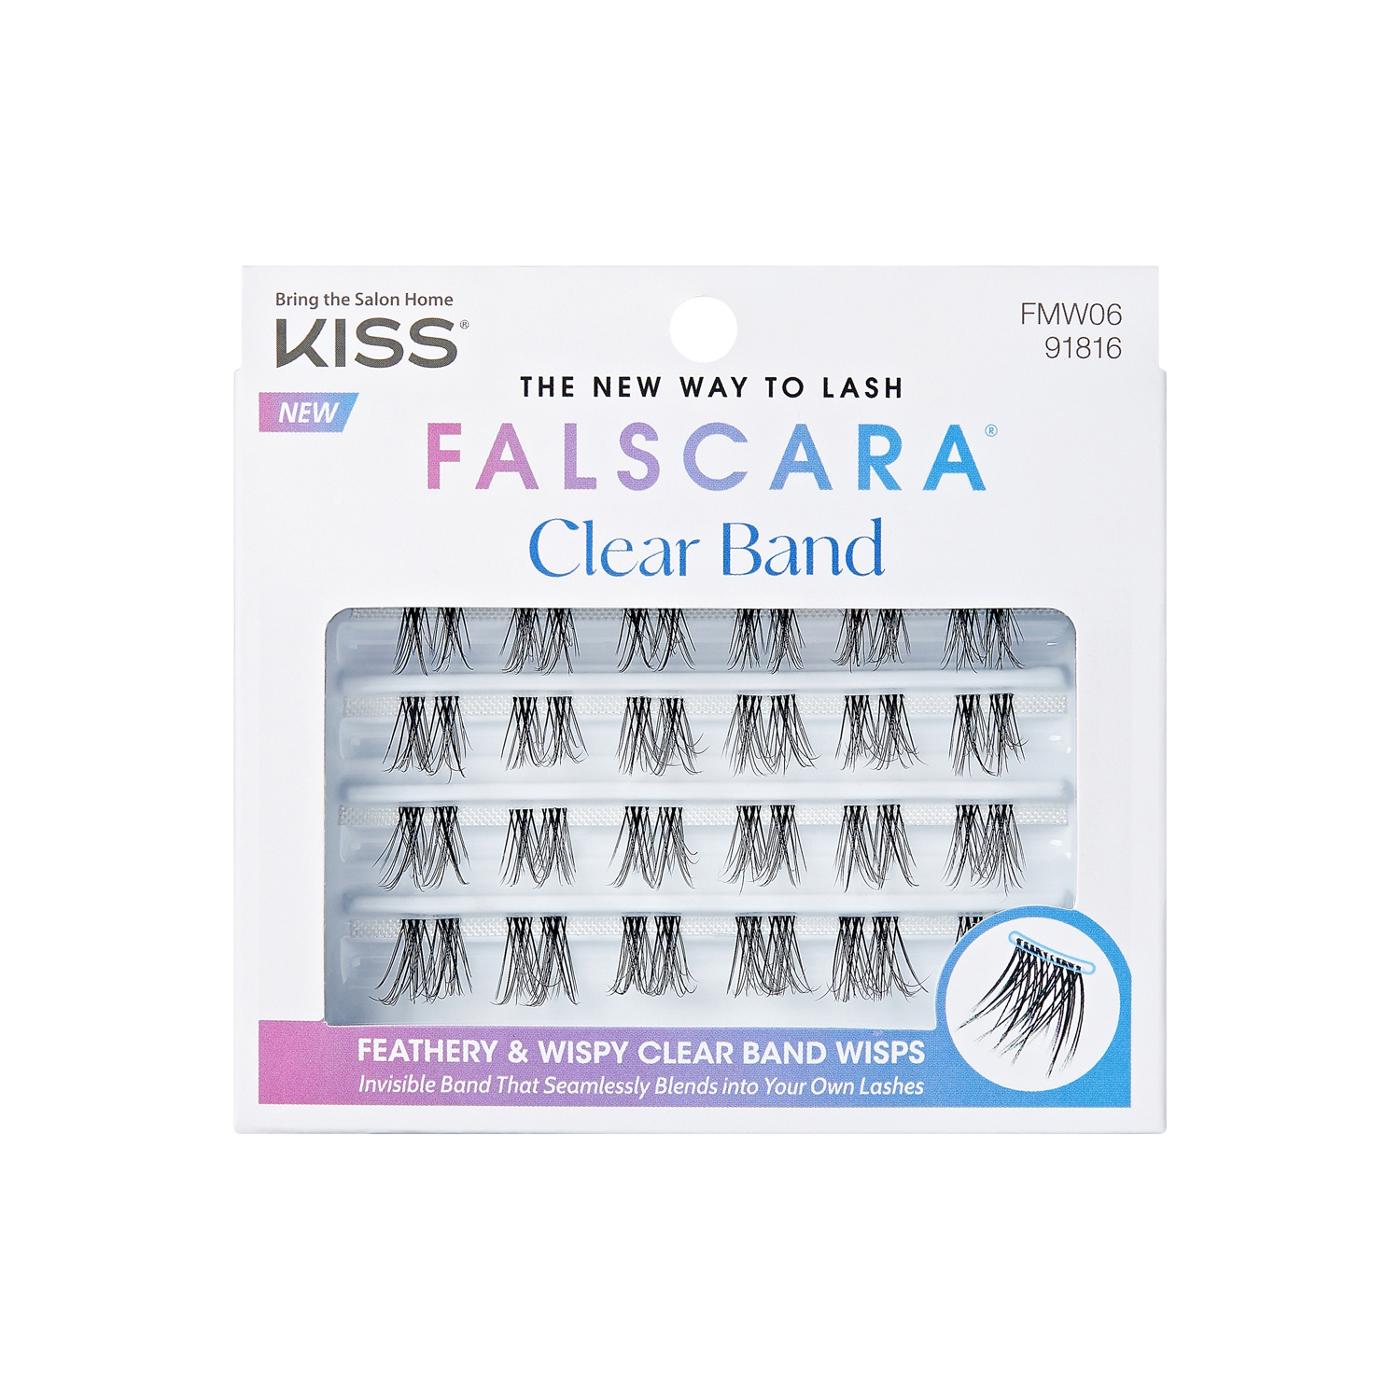 KISS Falscara Clear Band Multipack - Feathery & Wispy; image 1 of 7